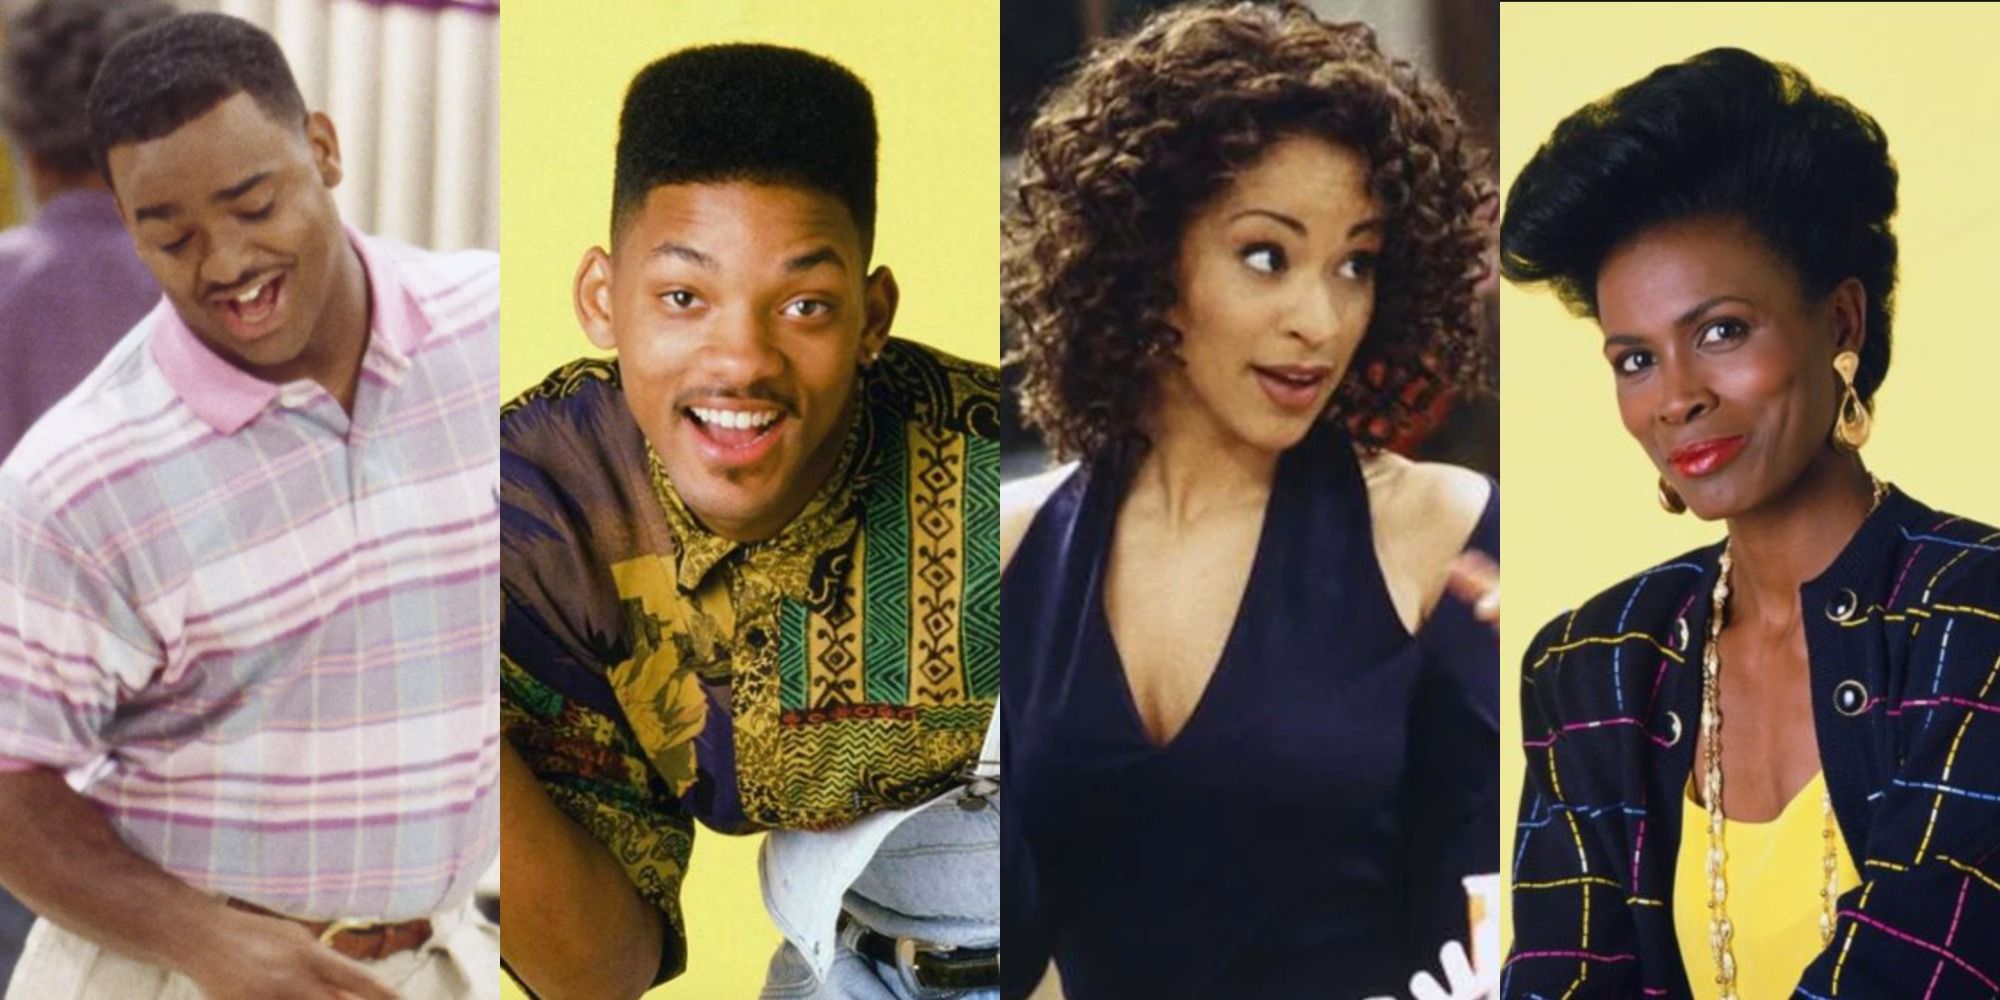 Collage of cast from Fresh Prince of Bel Air: Carlton, Will, Hilary and Aunt Viv (1st)